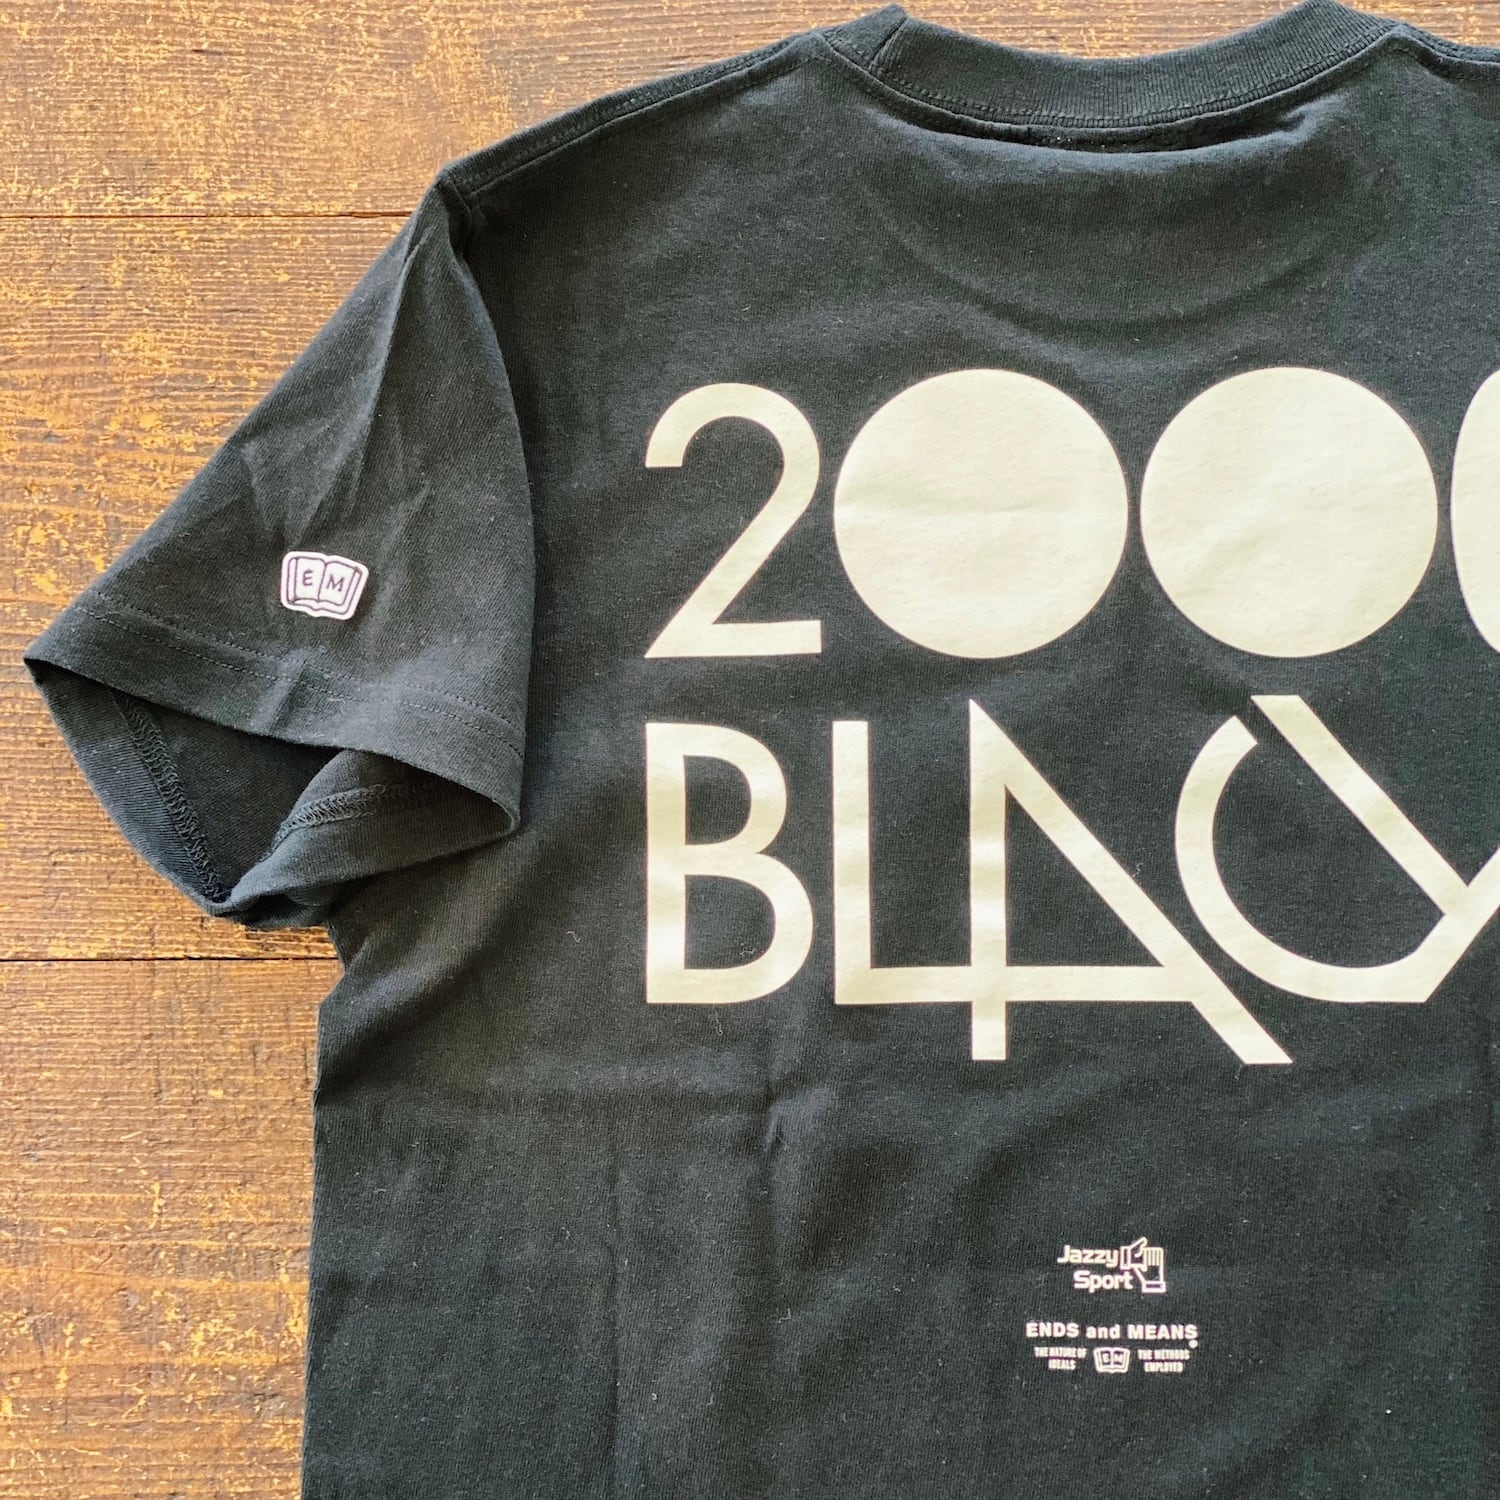 ENDS and MEANS／2000 Black × Jazzy Sport × EM Collaboration T-shirts  MAHINA MELE オンラインストア